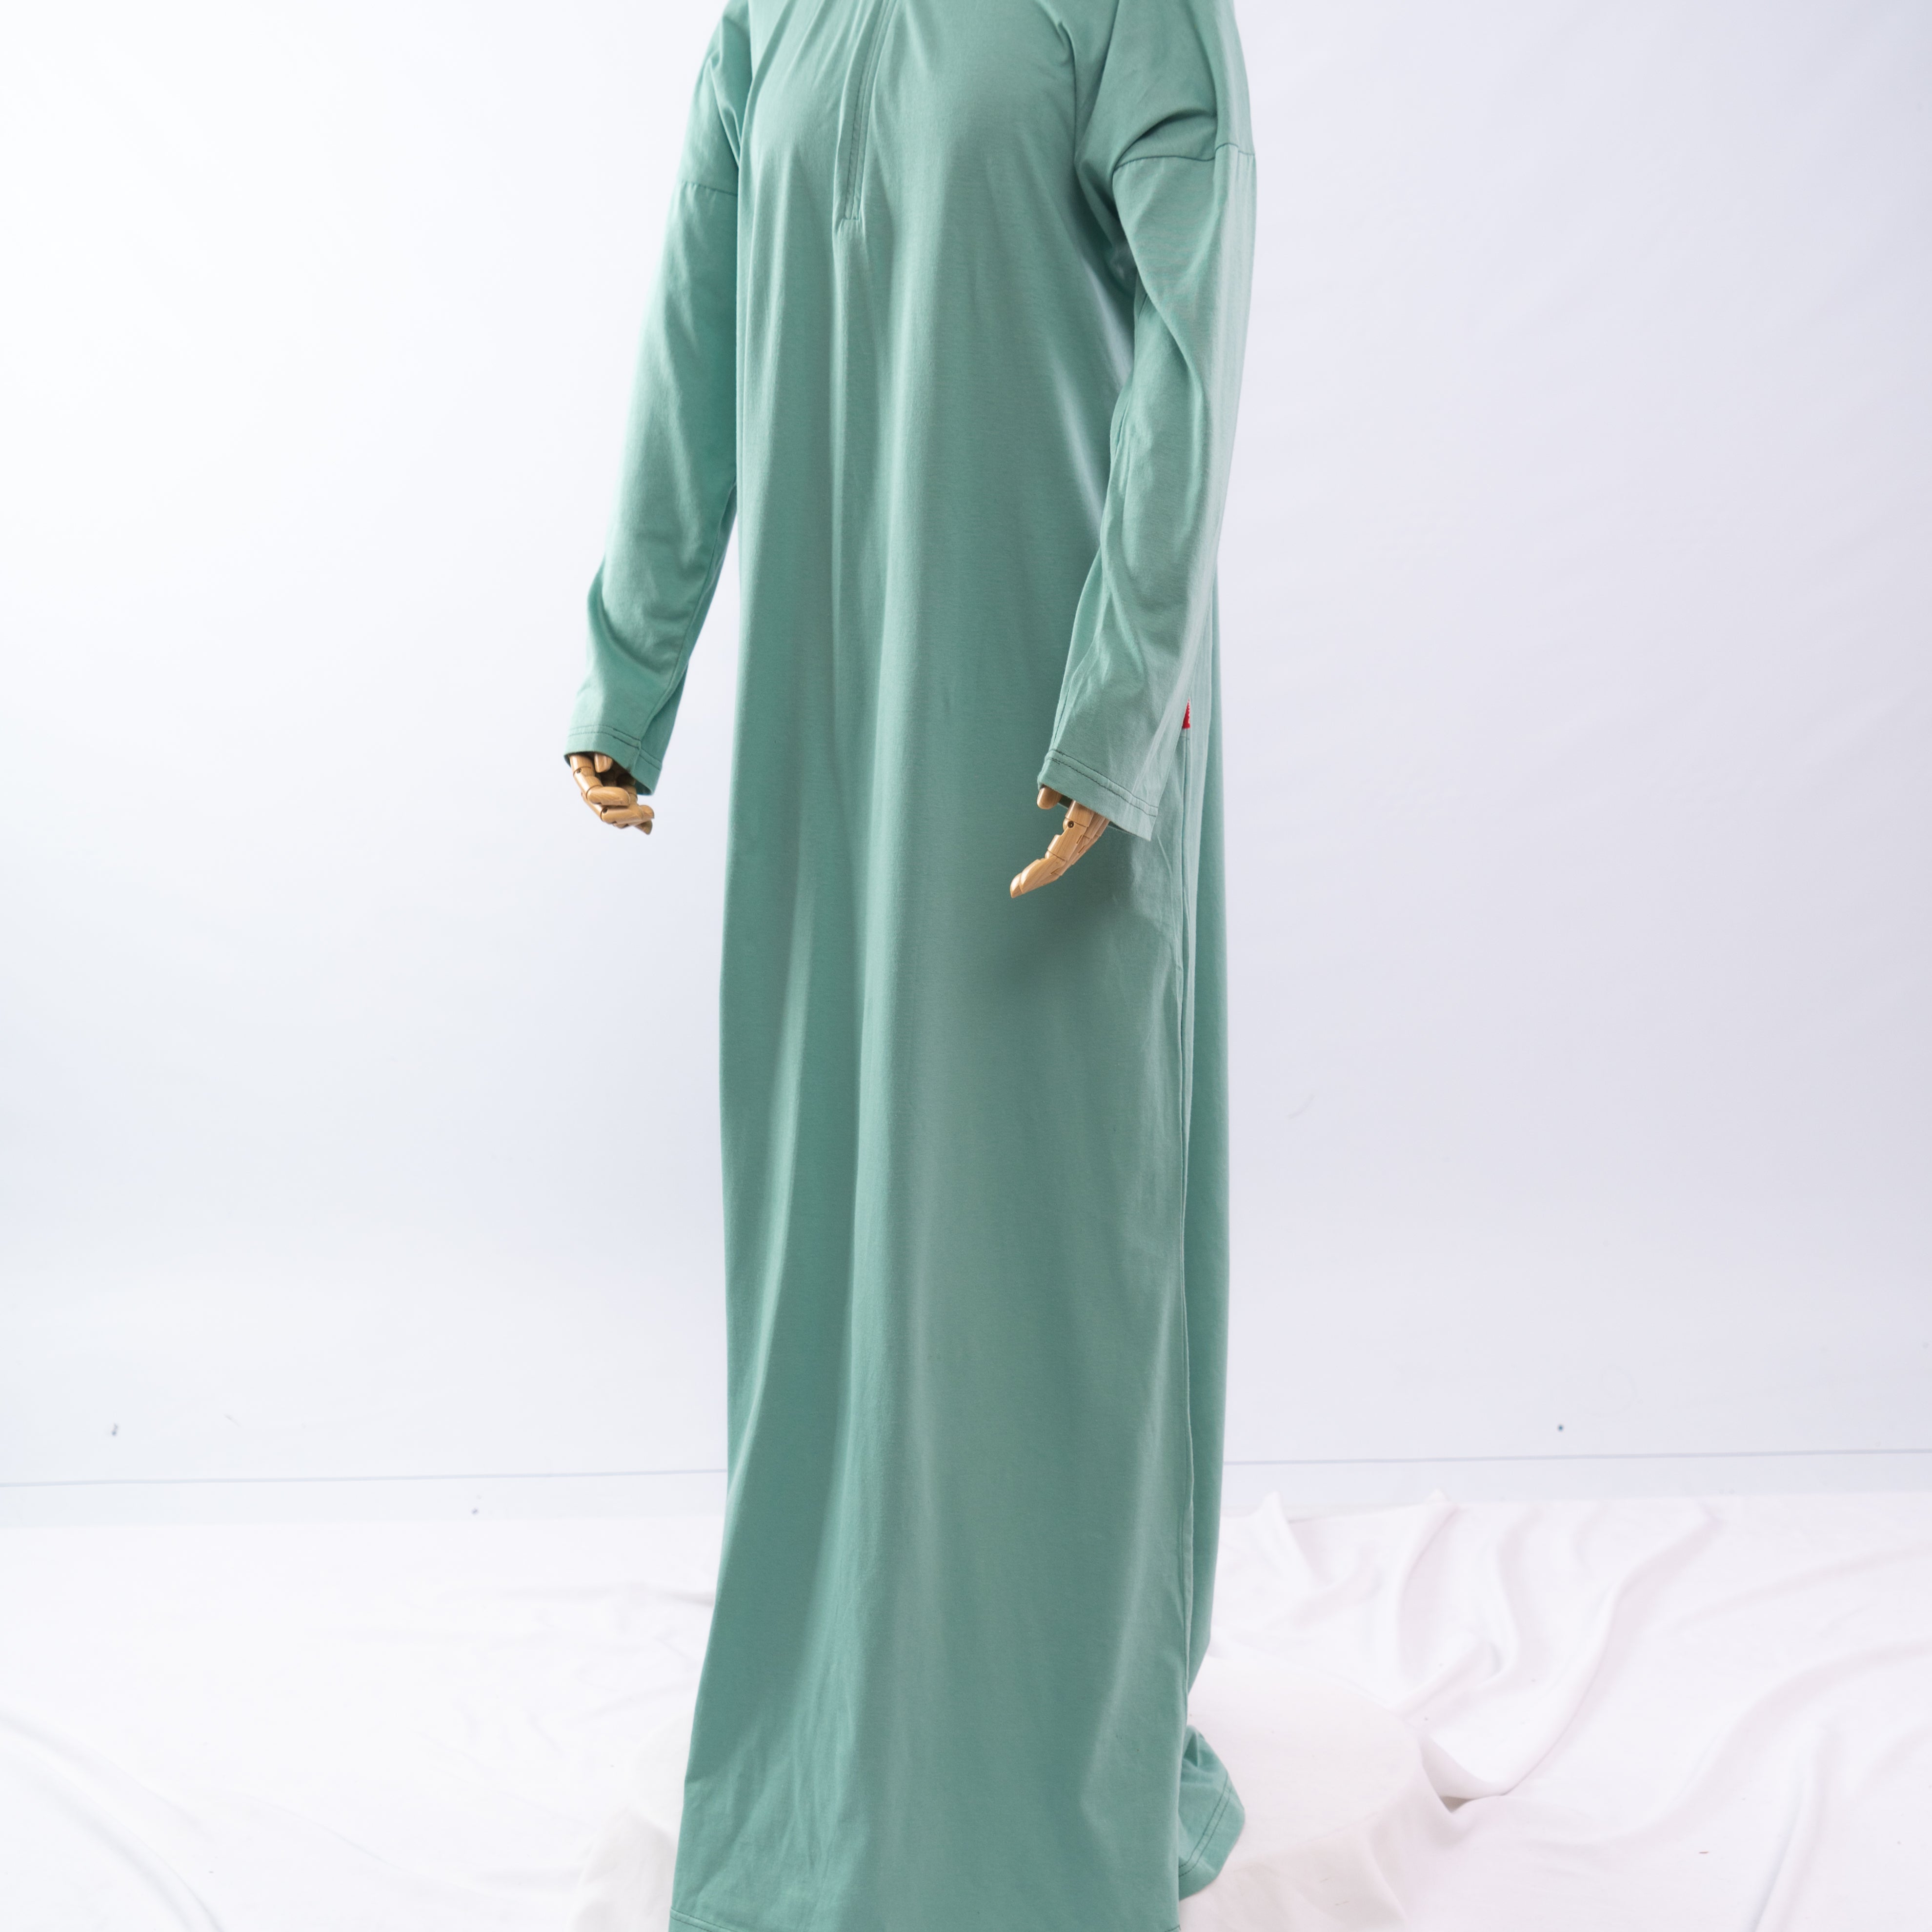 Dauky Gamis Limited Edition 32